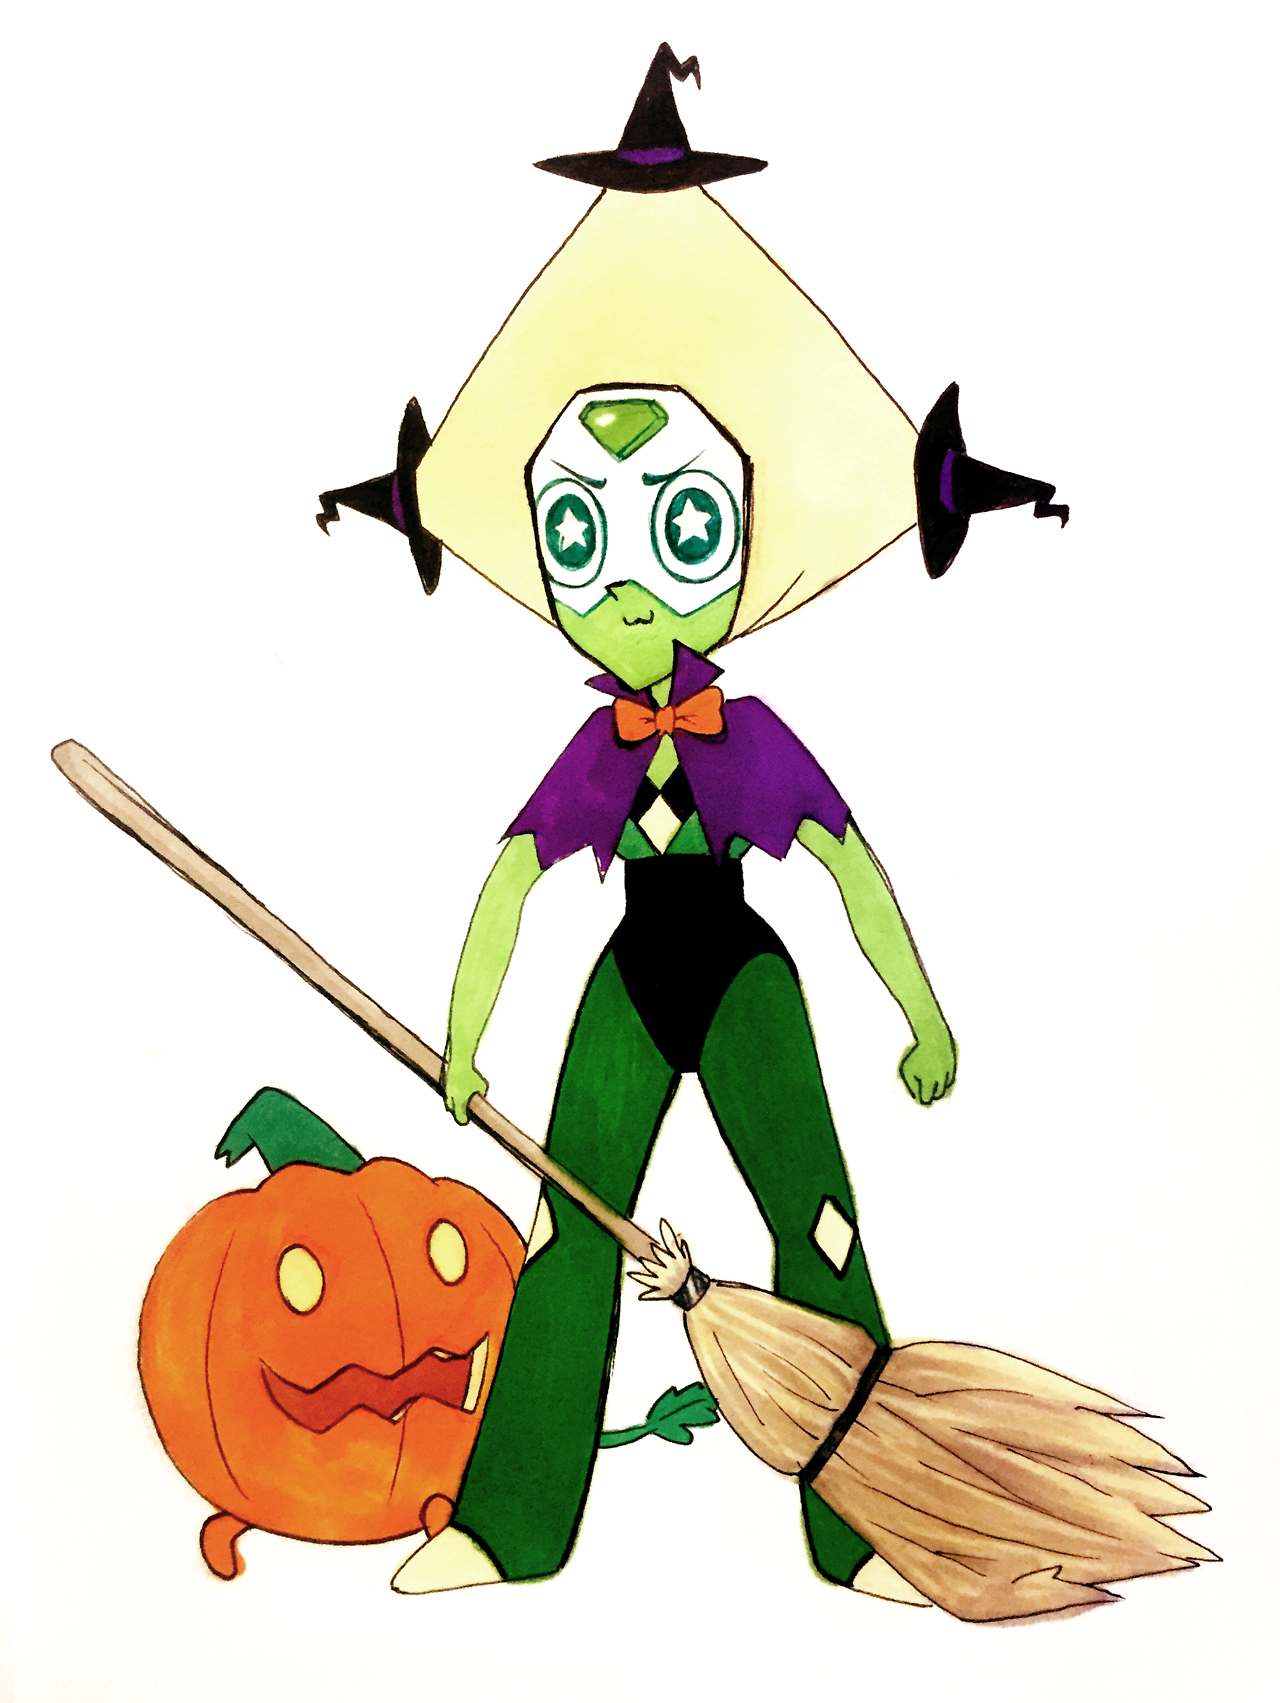 [Inktober 08] Peridot - Witch Hats Inktober Day 08 She’s ready for both the tricking AND the treating! Well, maybe not the treating since I forgot to add a pumpkin pail, but gems don’t eat anyway haha...